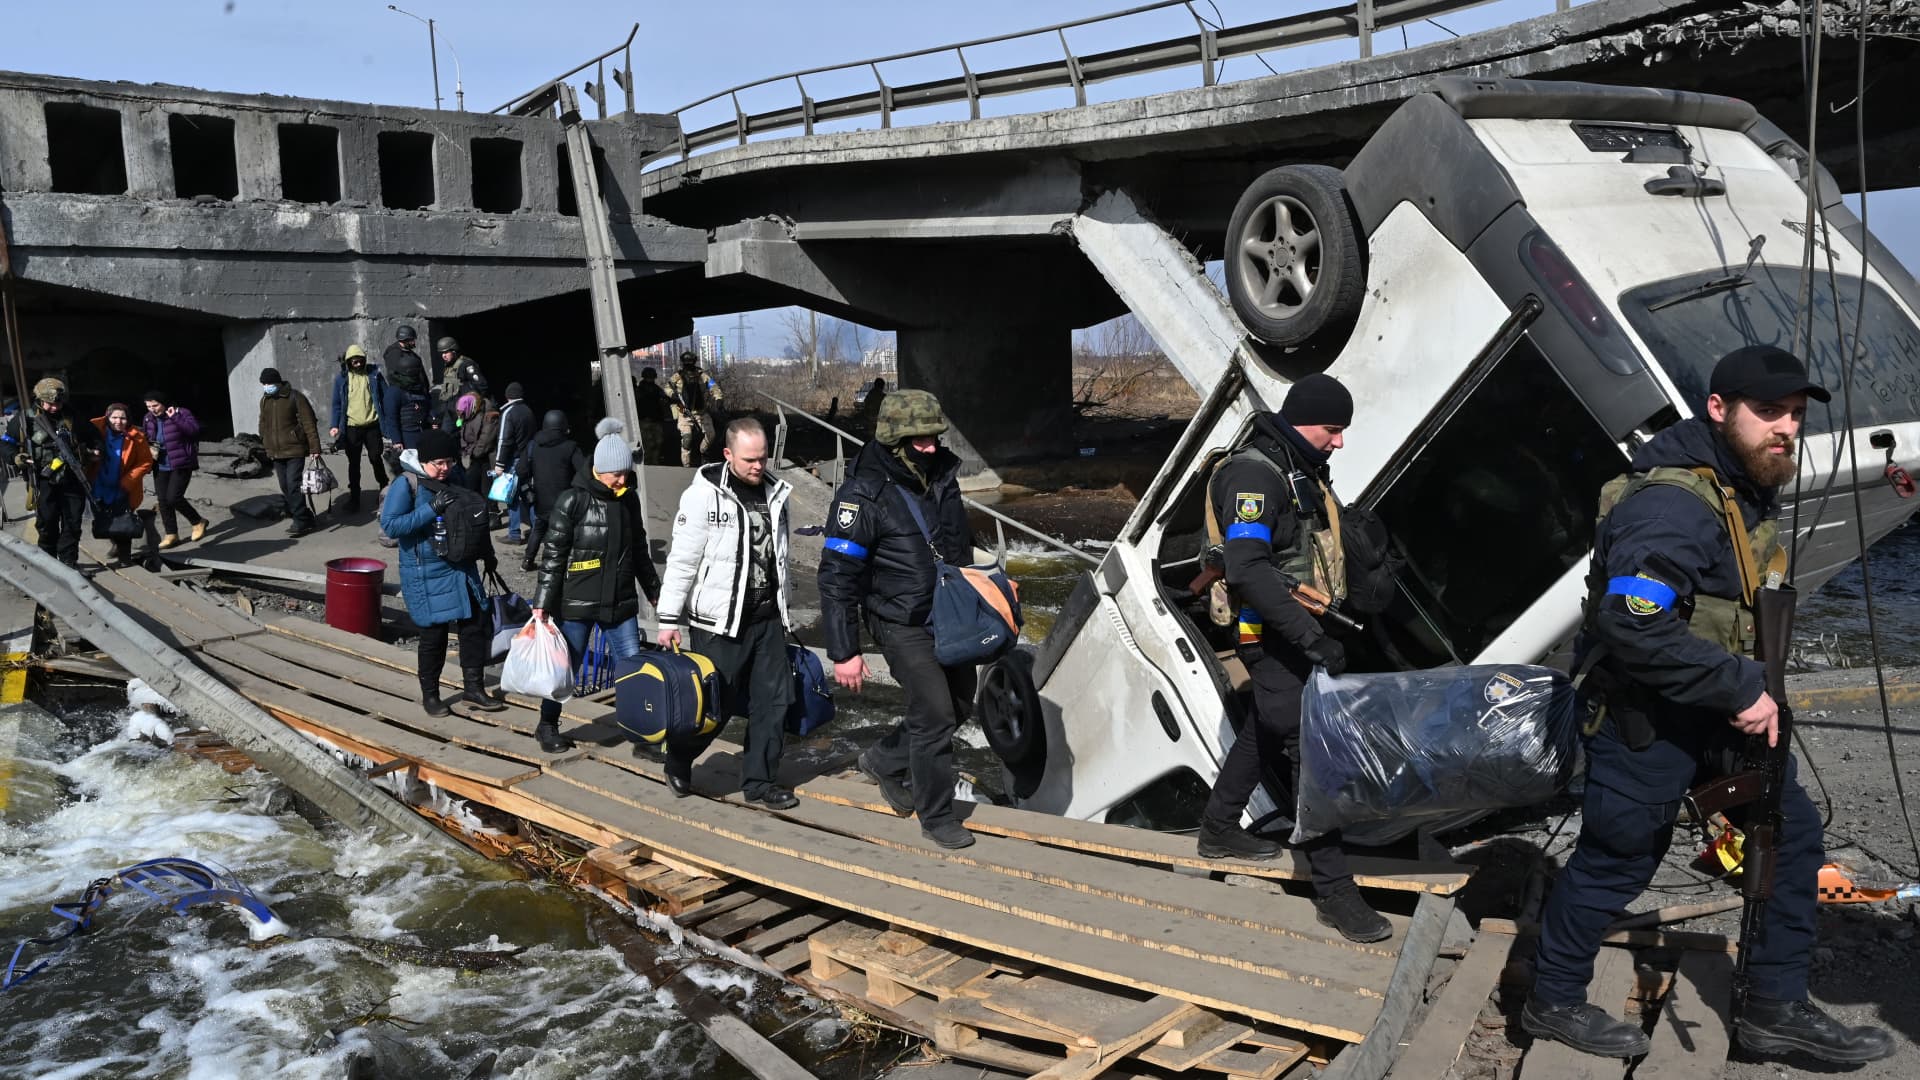 Ukrainian police officers help residents to cross a destroyed bridge as they evacuate Irpin, northwest of Kyiv, on March 12, 2022.